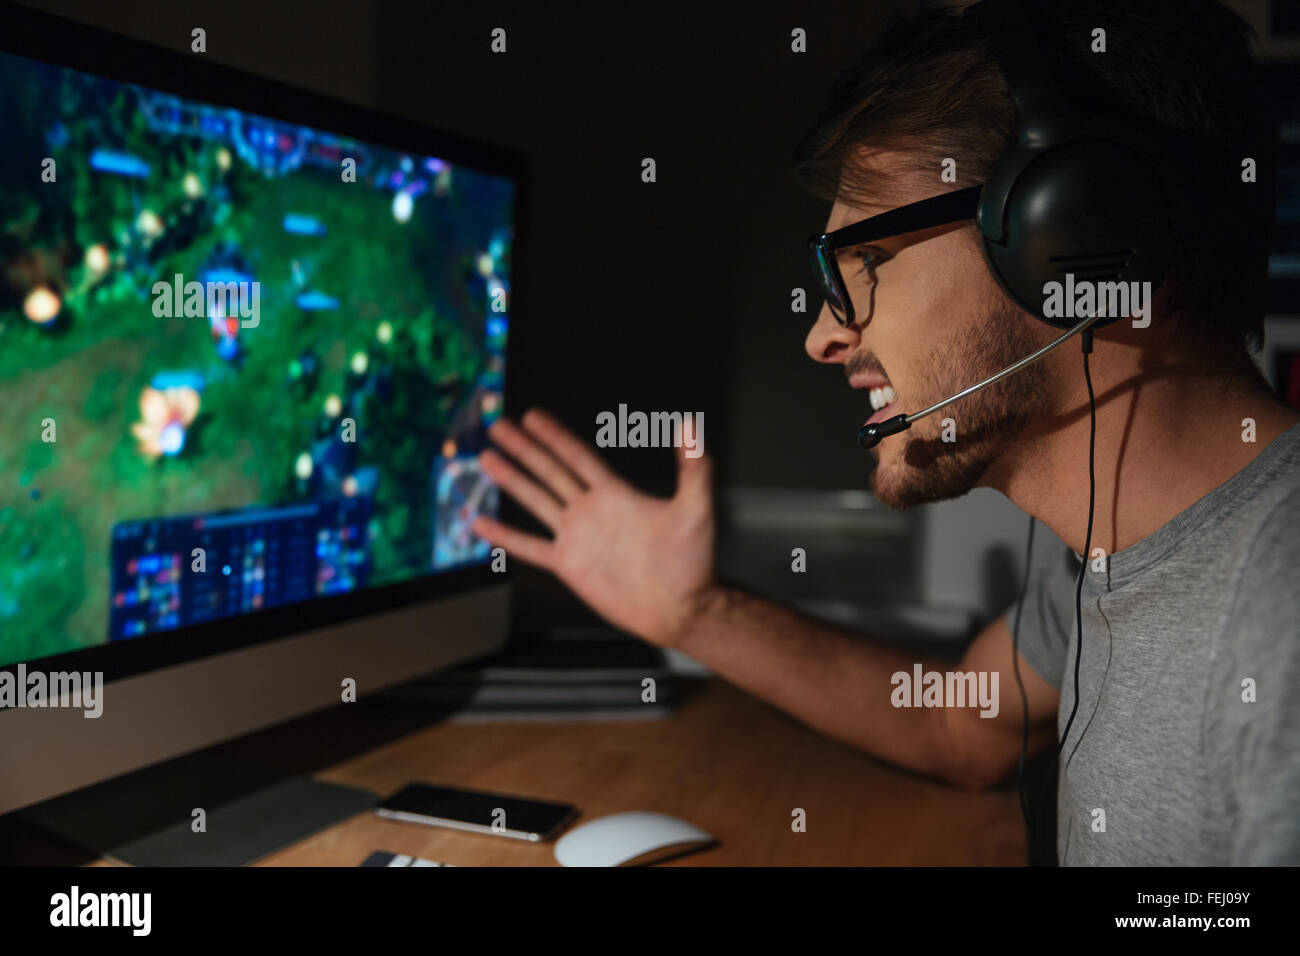 Cheerful young gamer in glasses playing game on computer using headphones Stock Photo